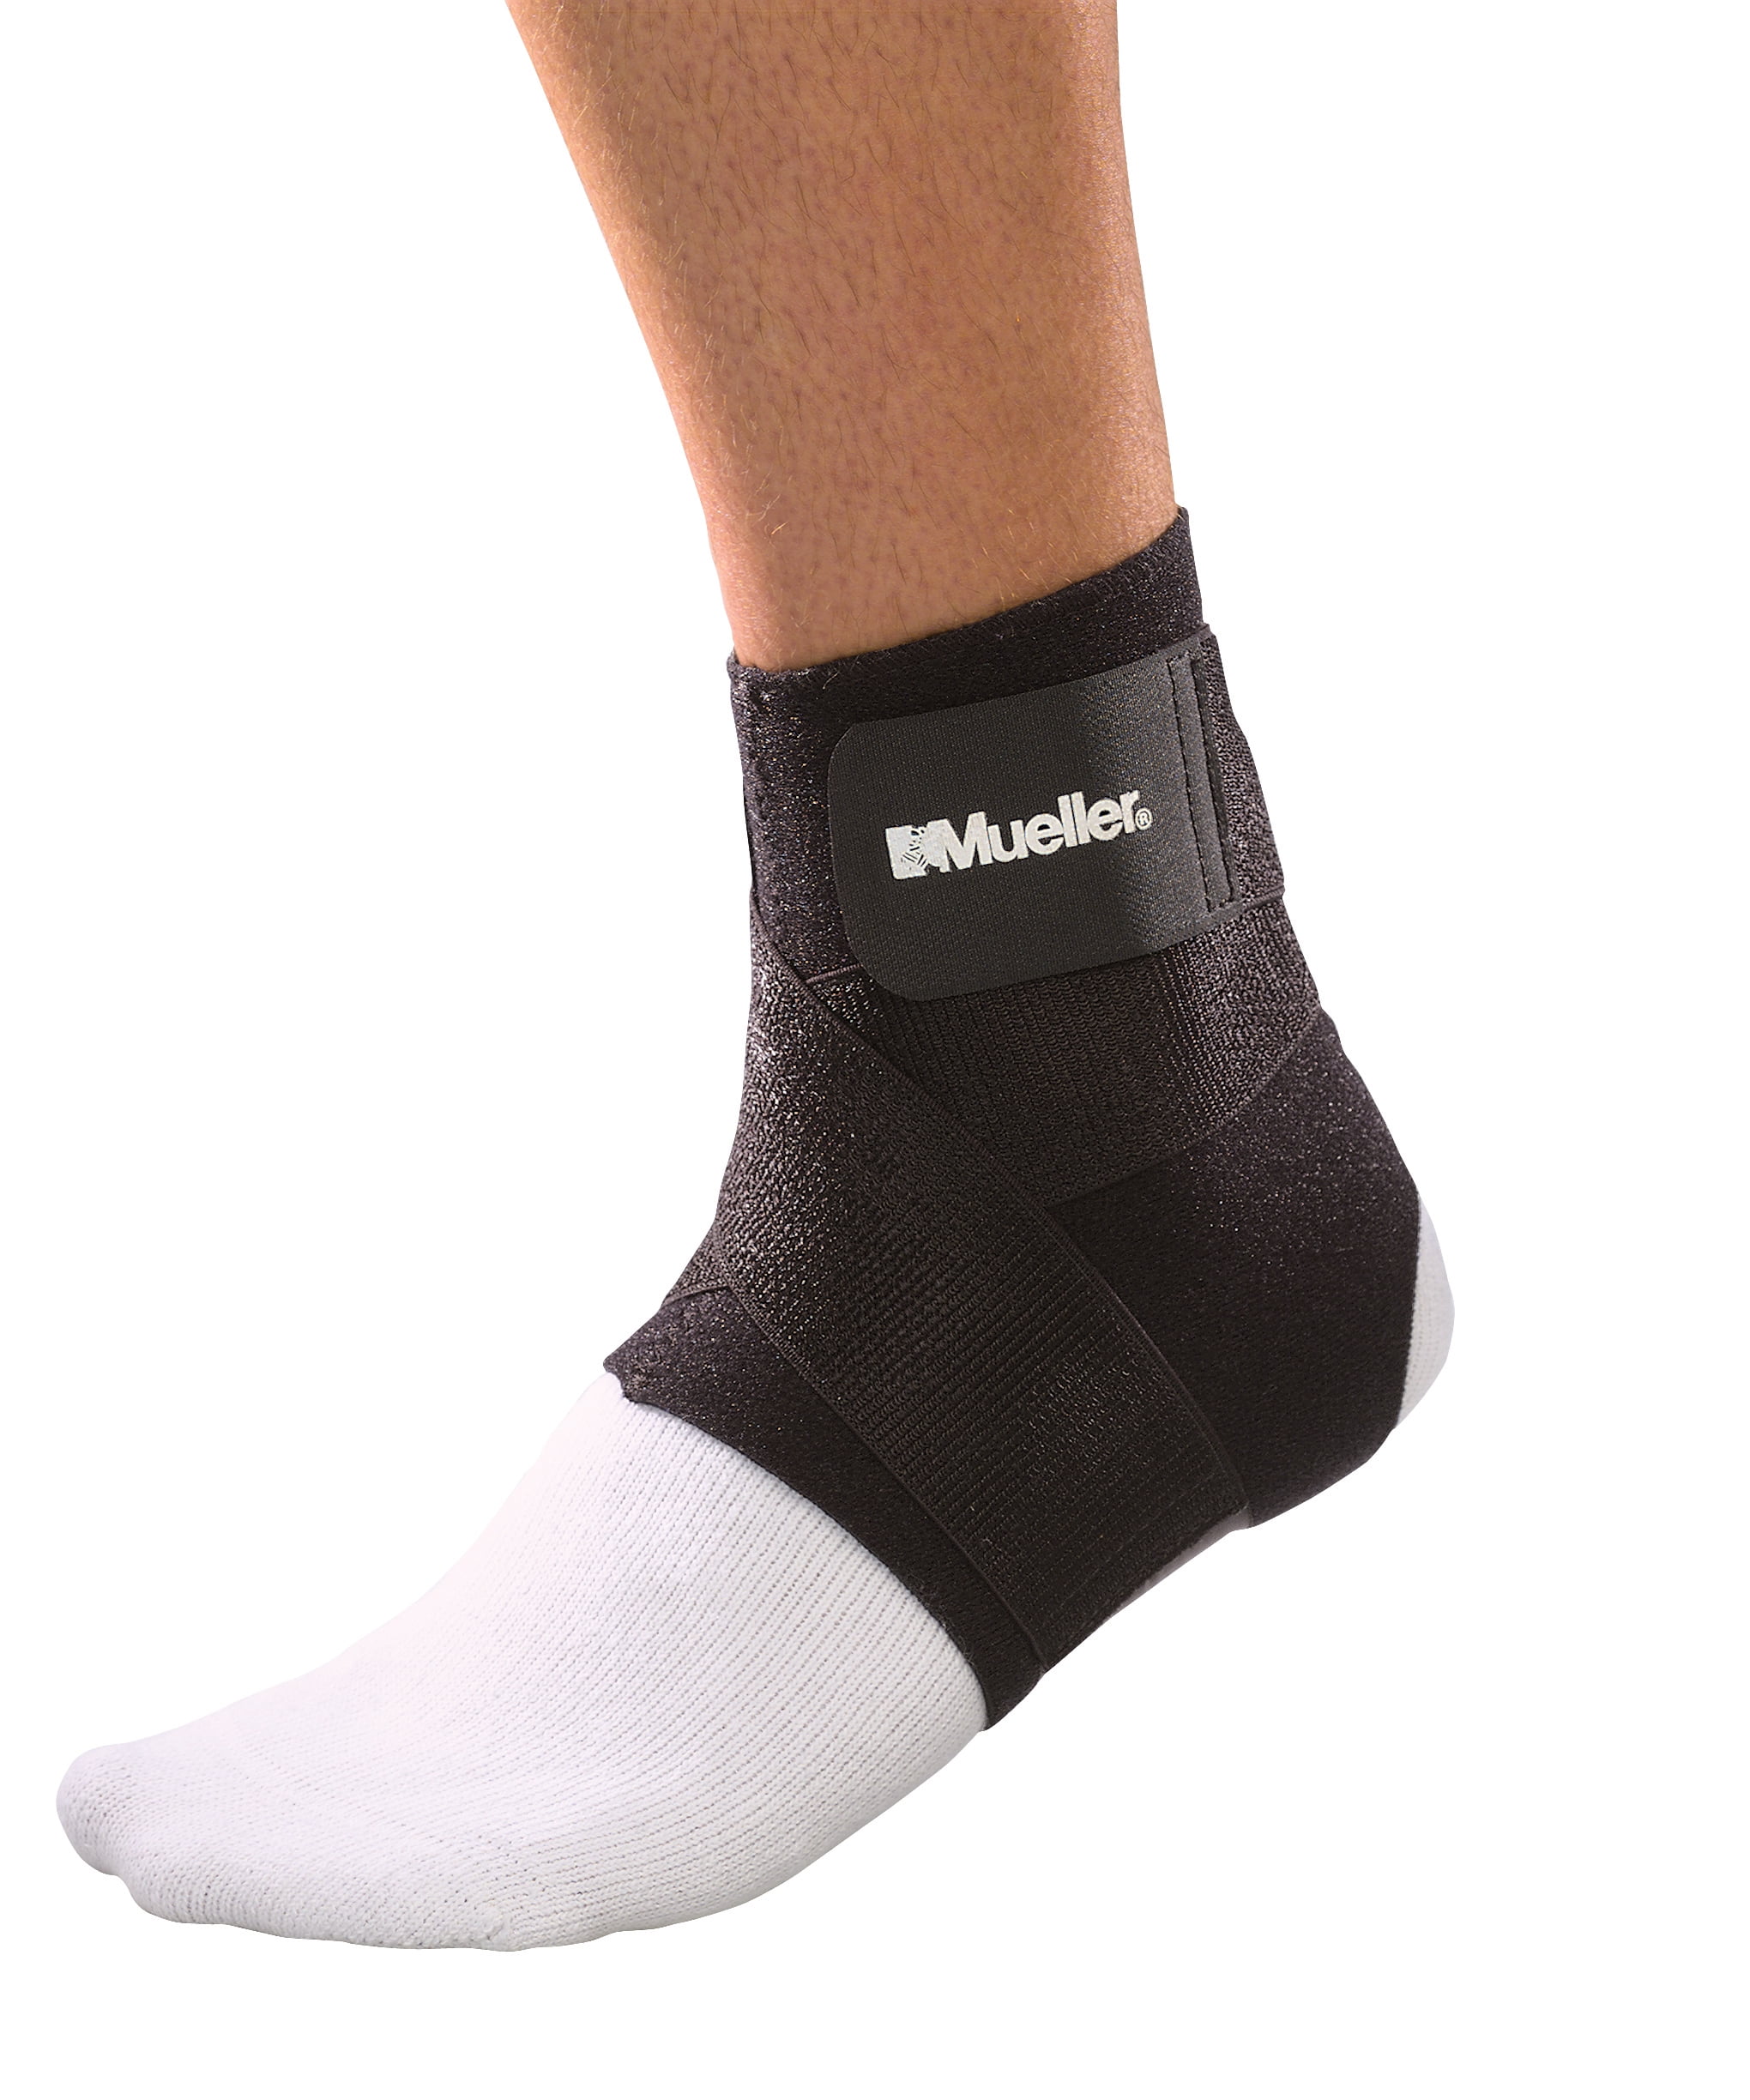 L-XL MAVA Sports Ankle Brace Compression Support Sleeve for Sports & Therapy 